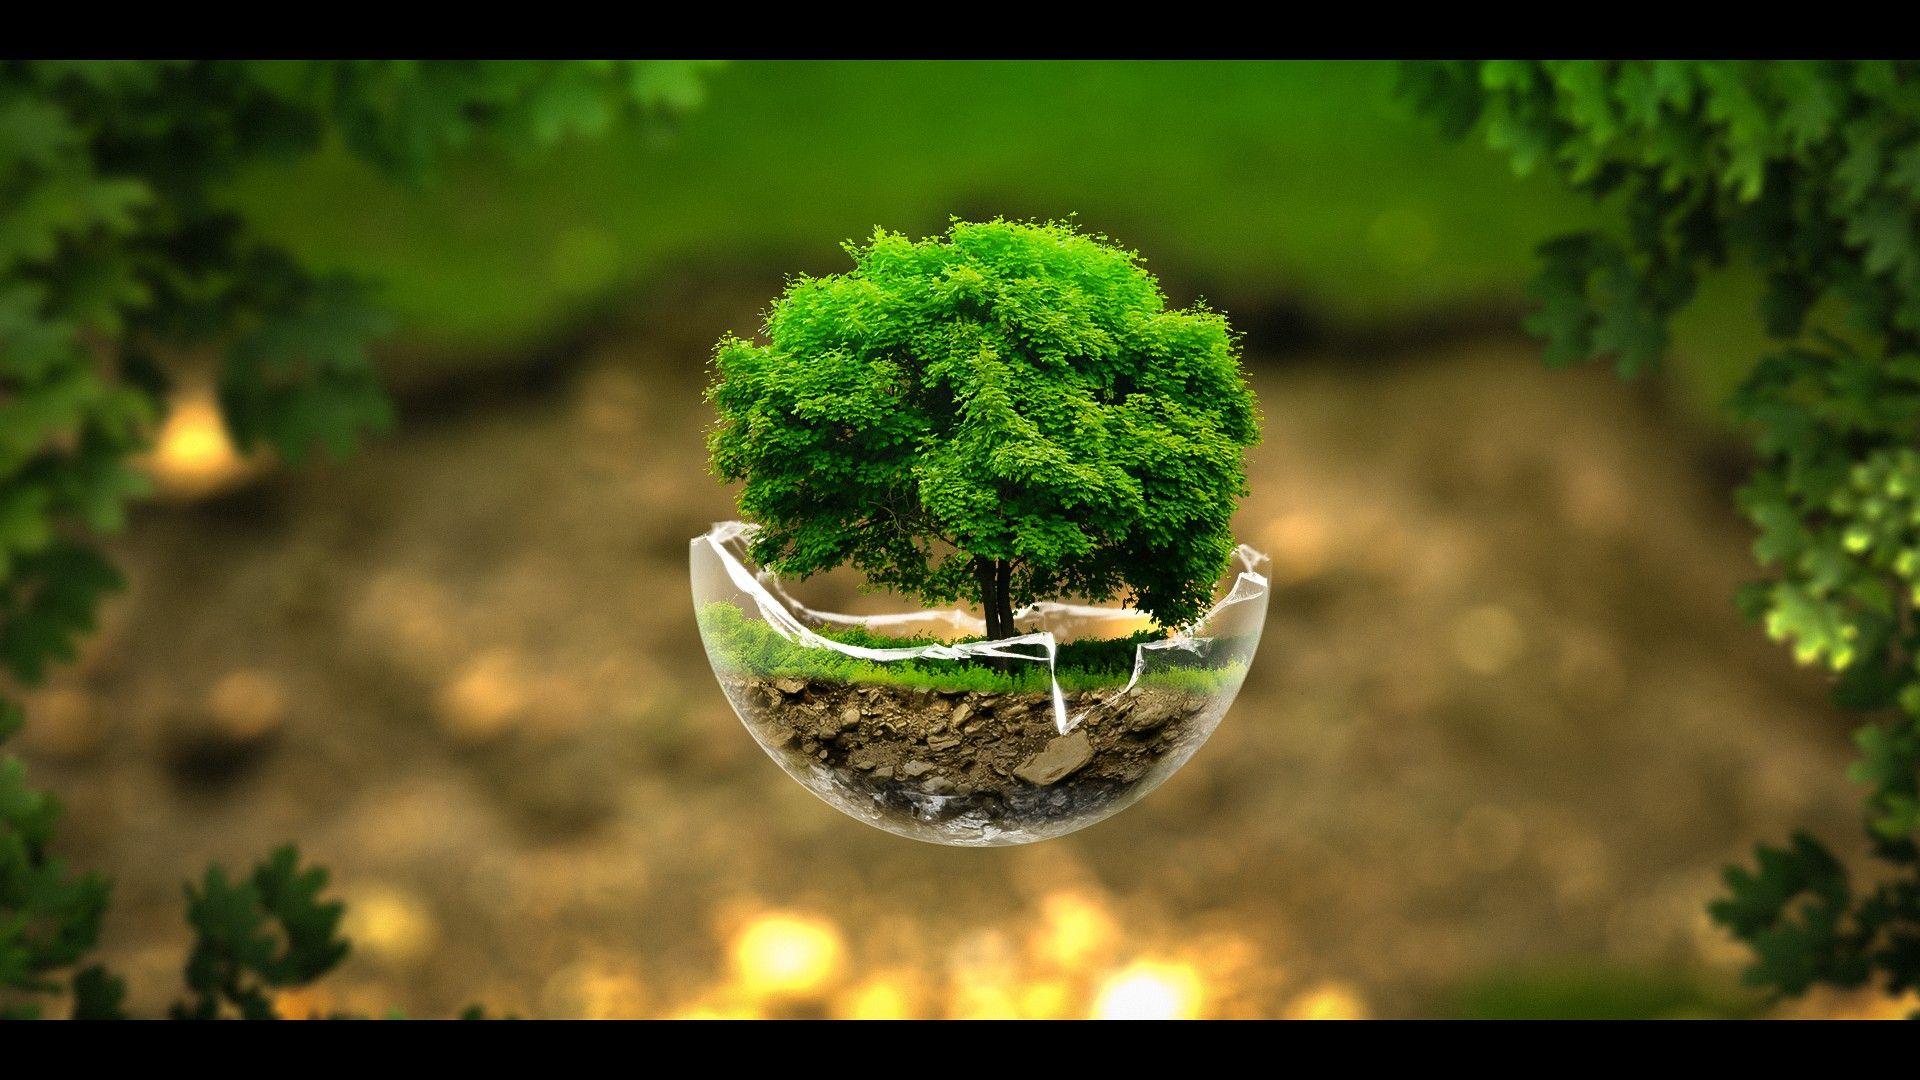 Bonsai Background Images HD Pictures and Wallpaper For Free Download   Pngtree